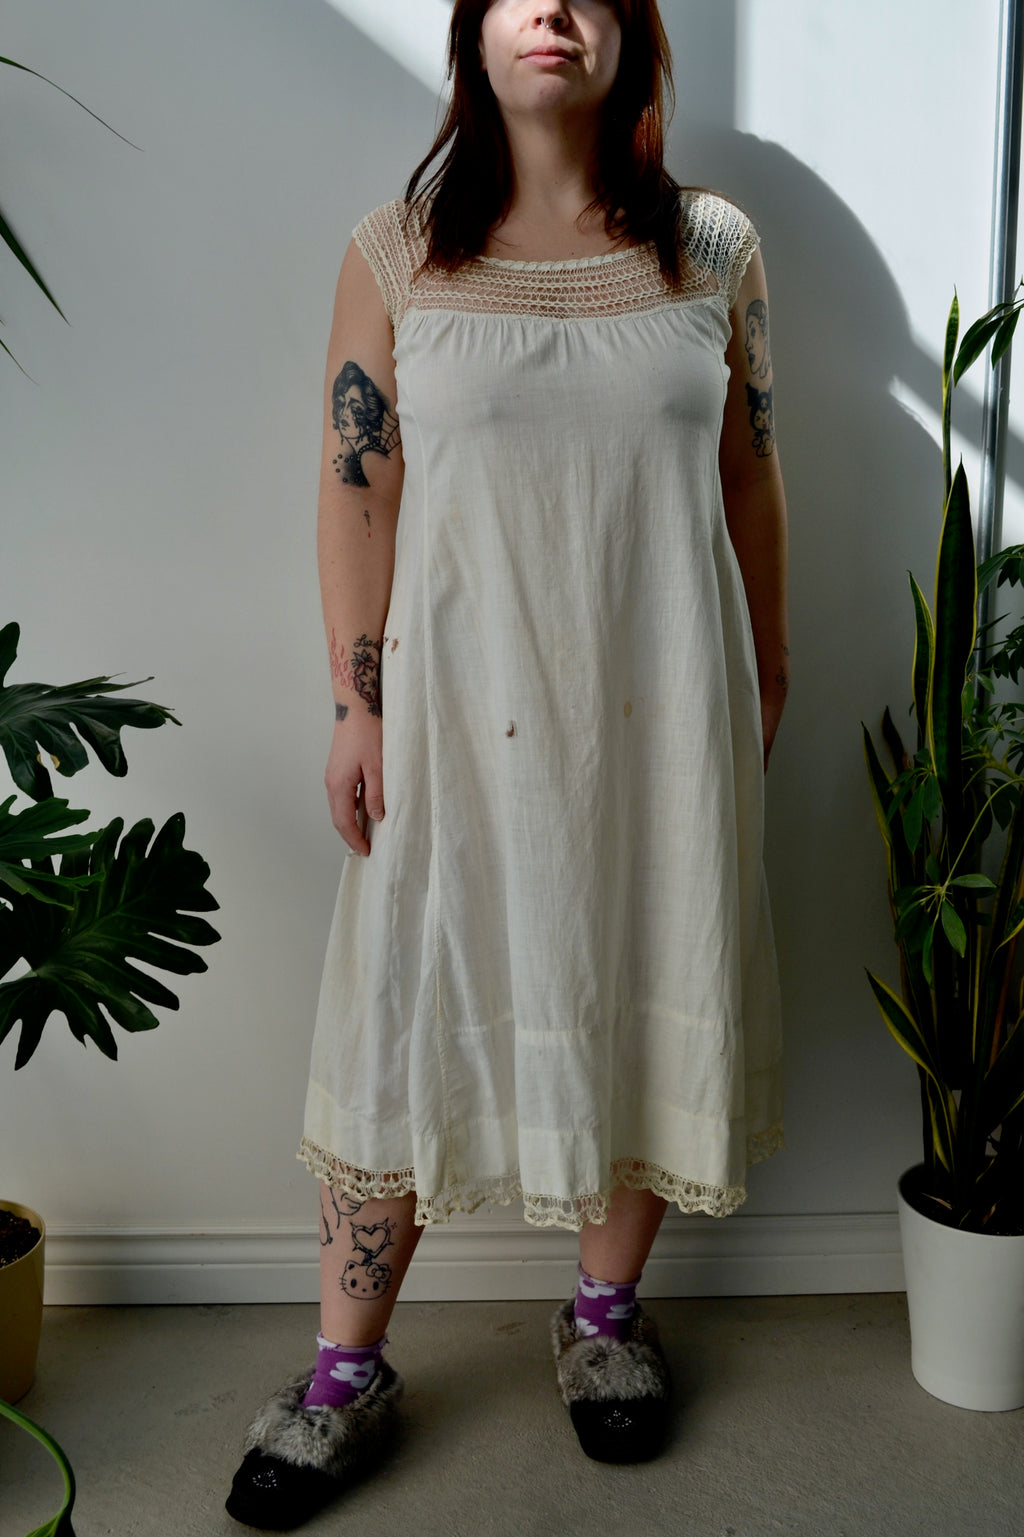 Netted Lace Antique Nightie